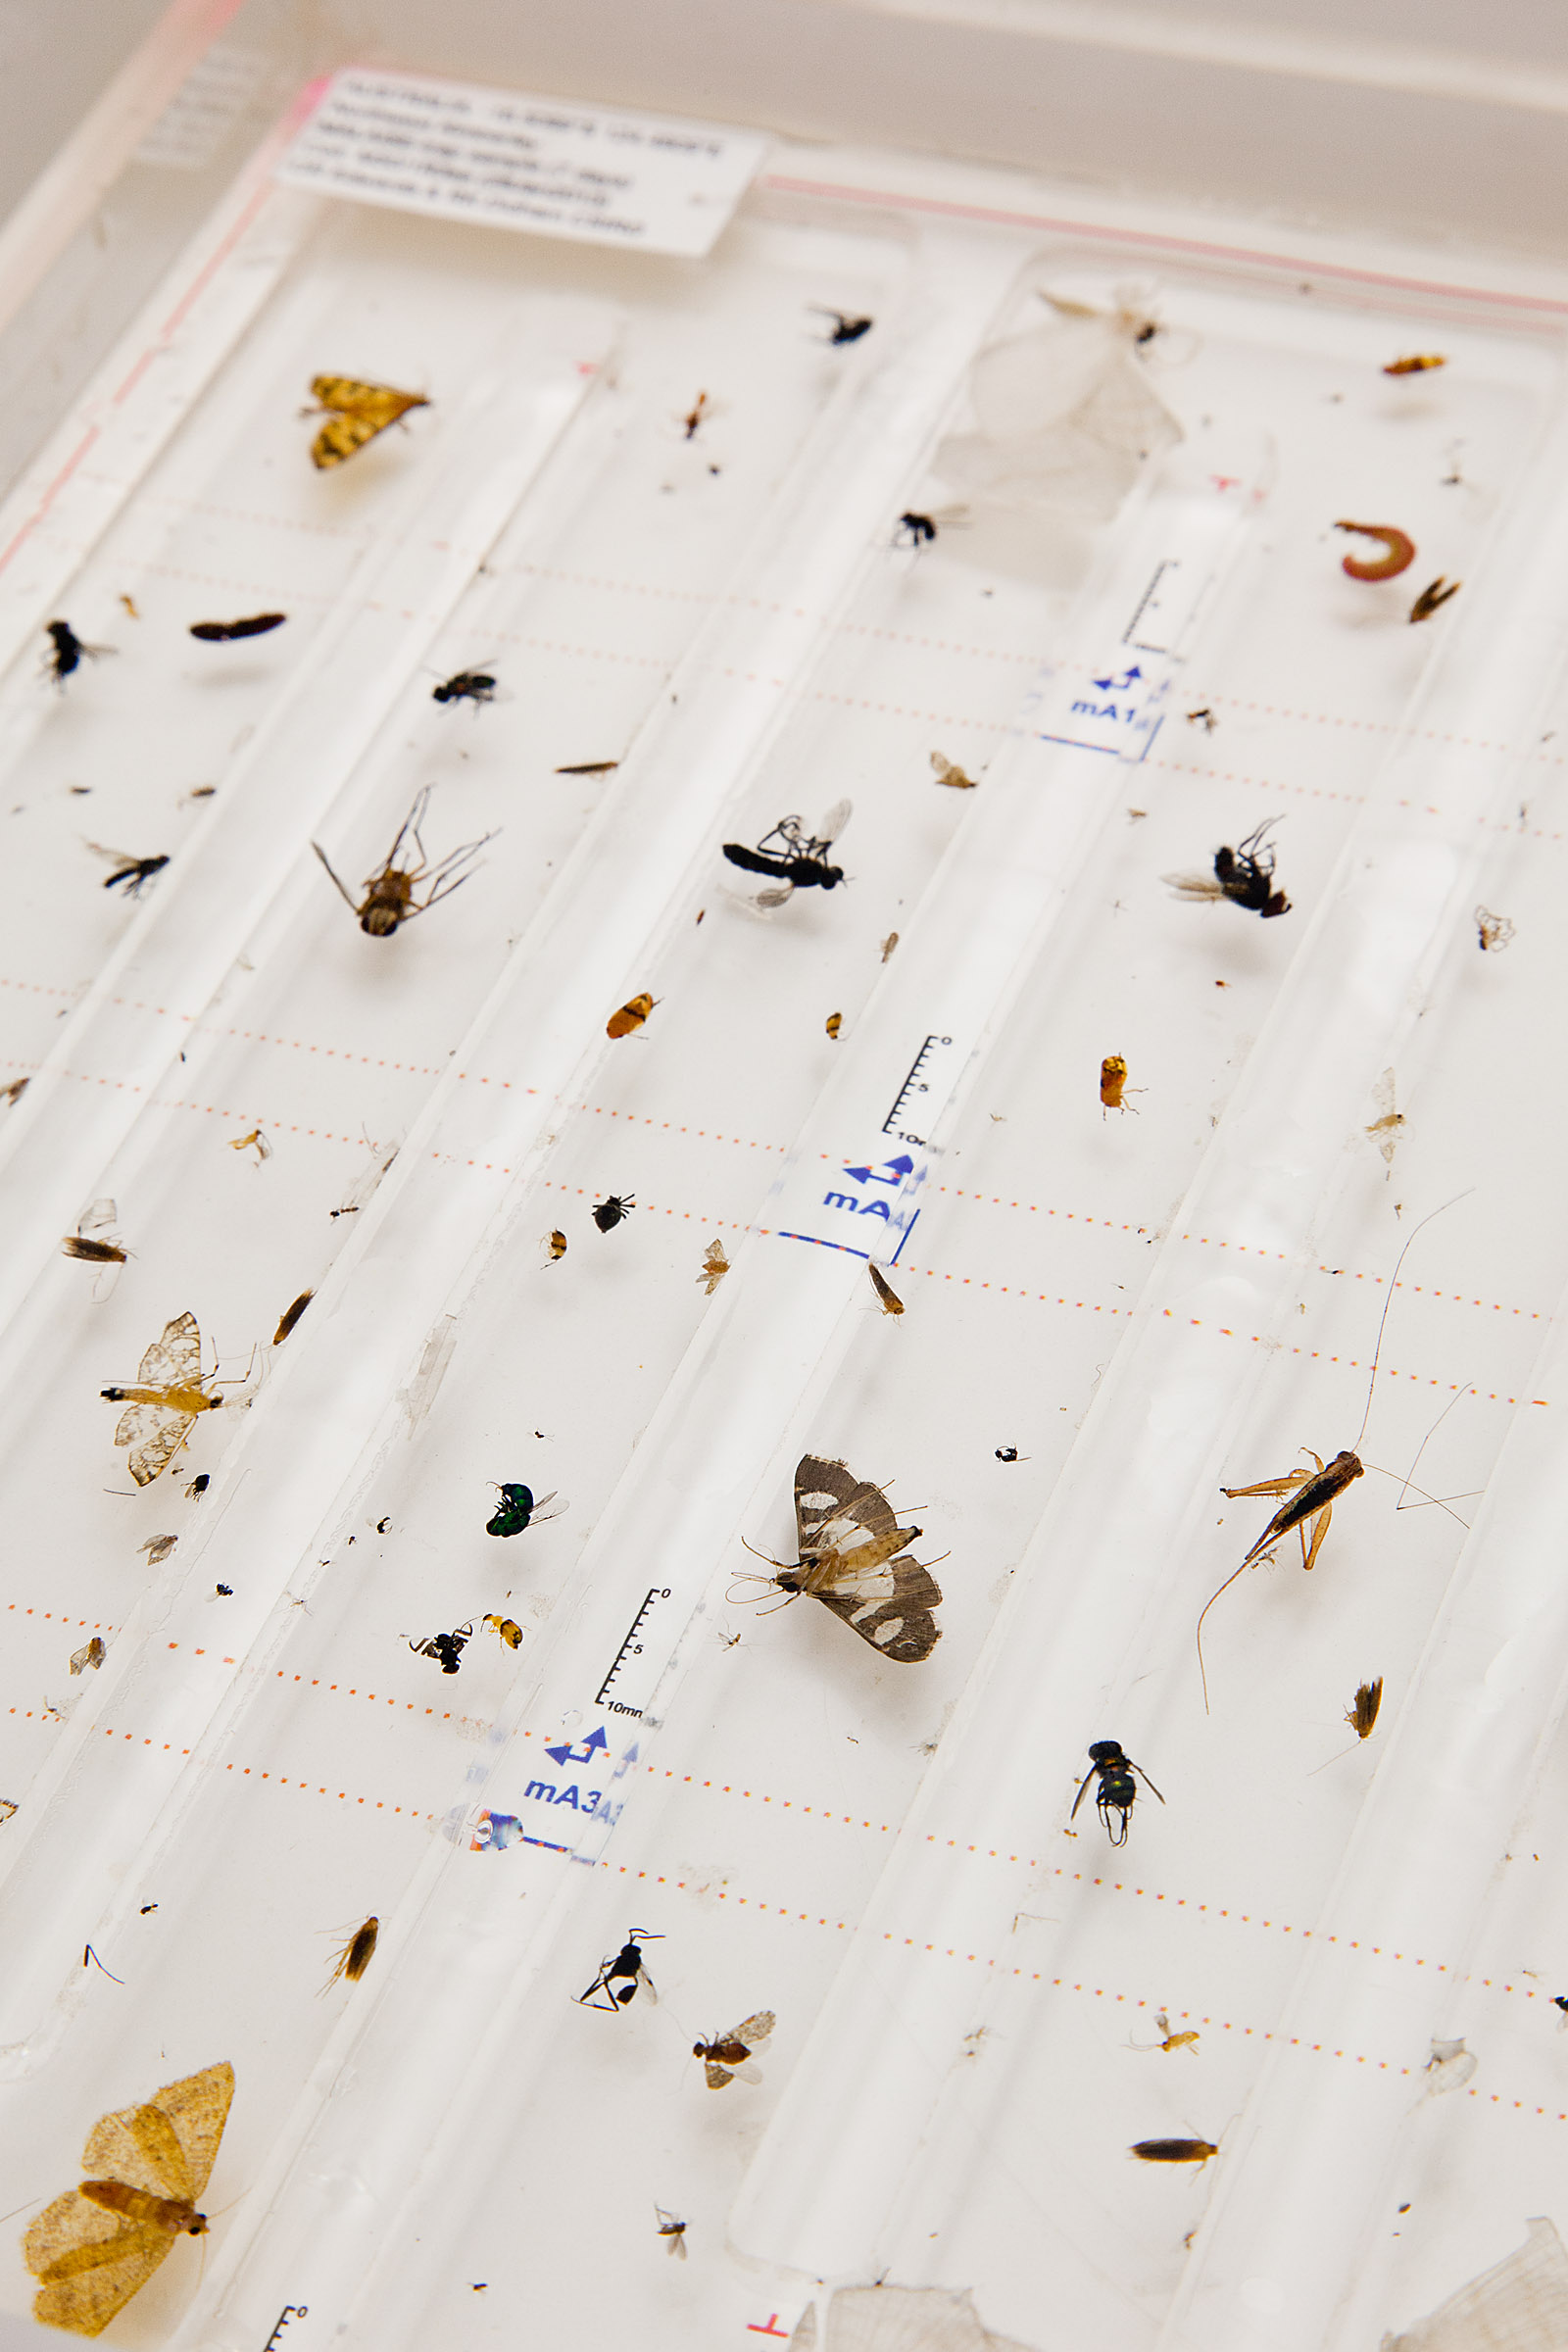 A small sample of the 300,000 insects collected as part of the survey. Image: Bruce Webber